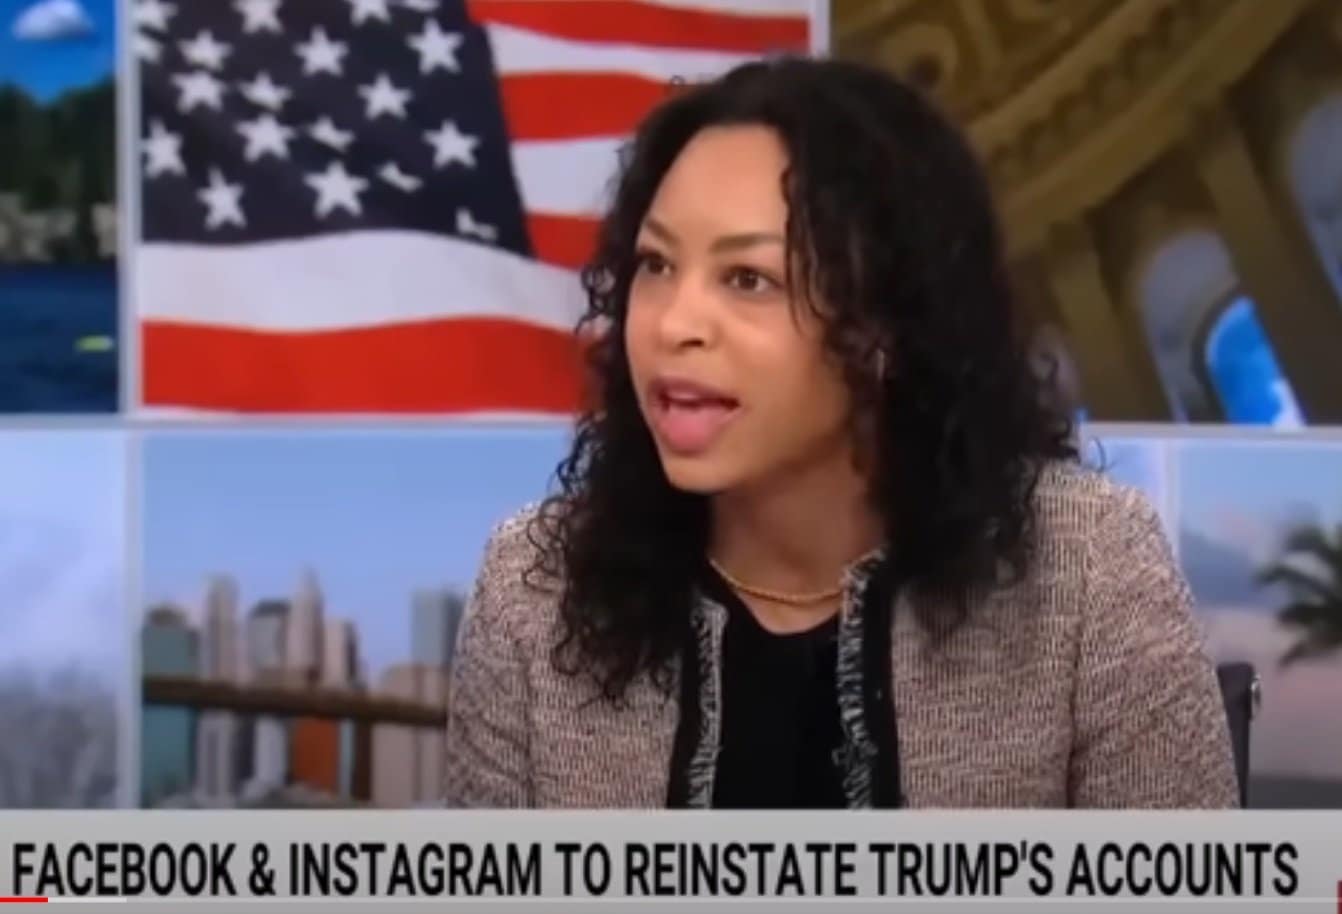 WATCH: NYT Editorial Board Member Mara Gay Appears on MSNBC and Melts Down Over Trump Being Reinstated on Social Media